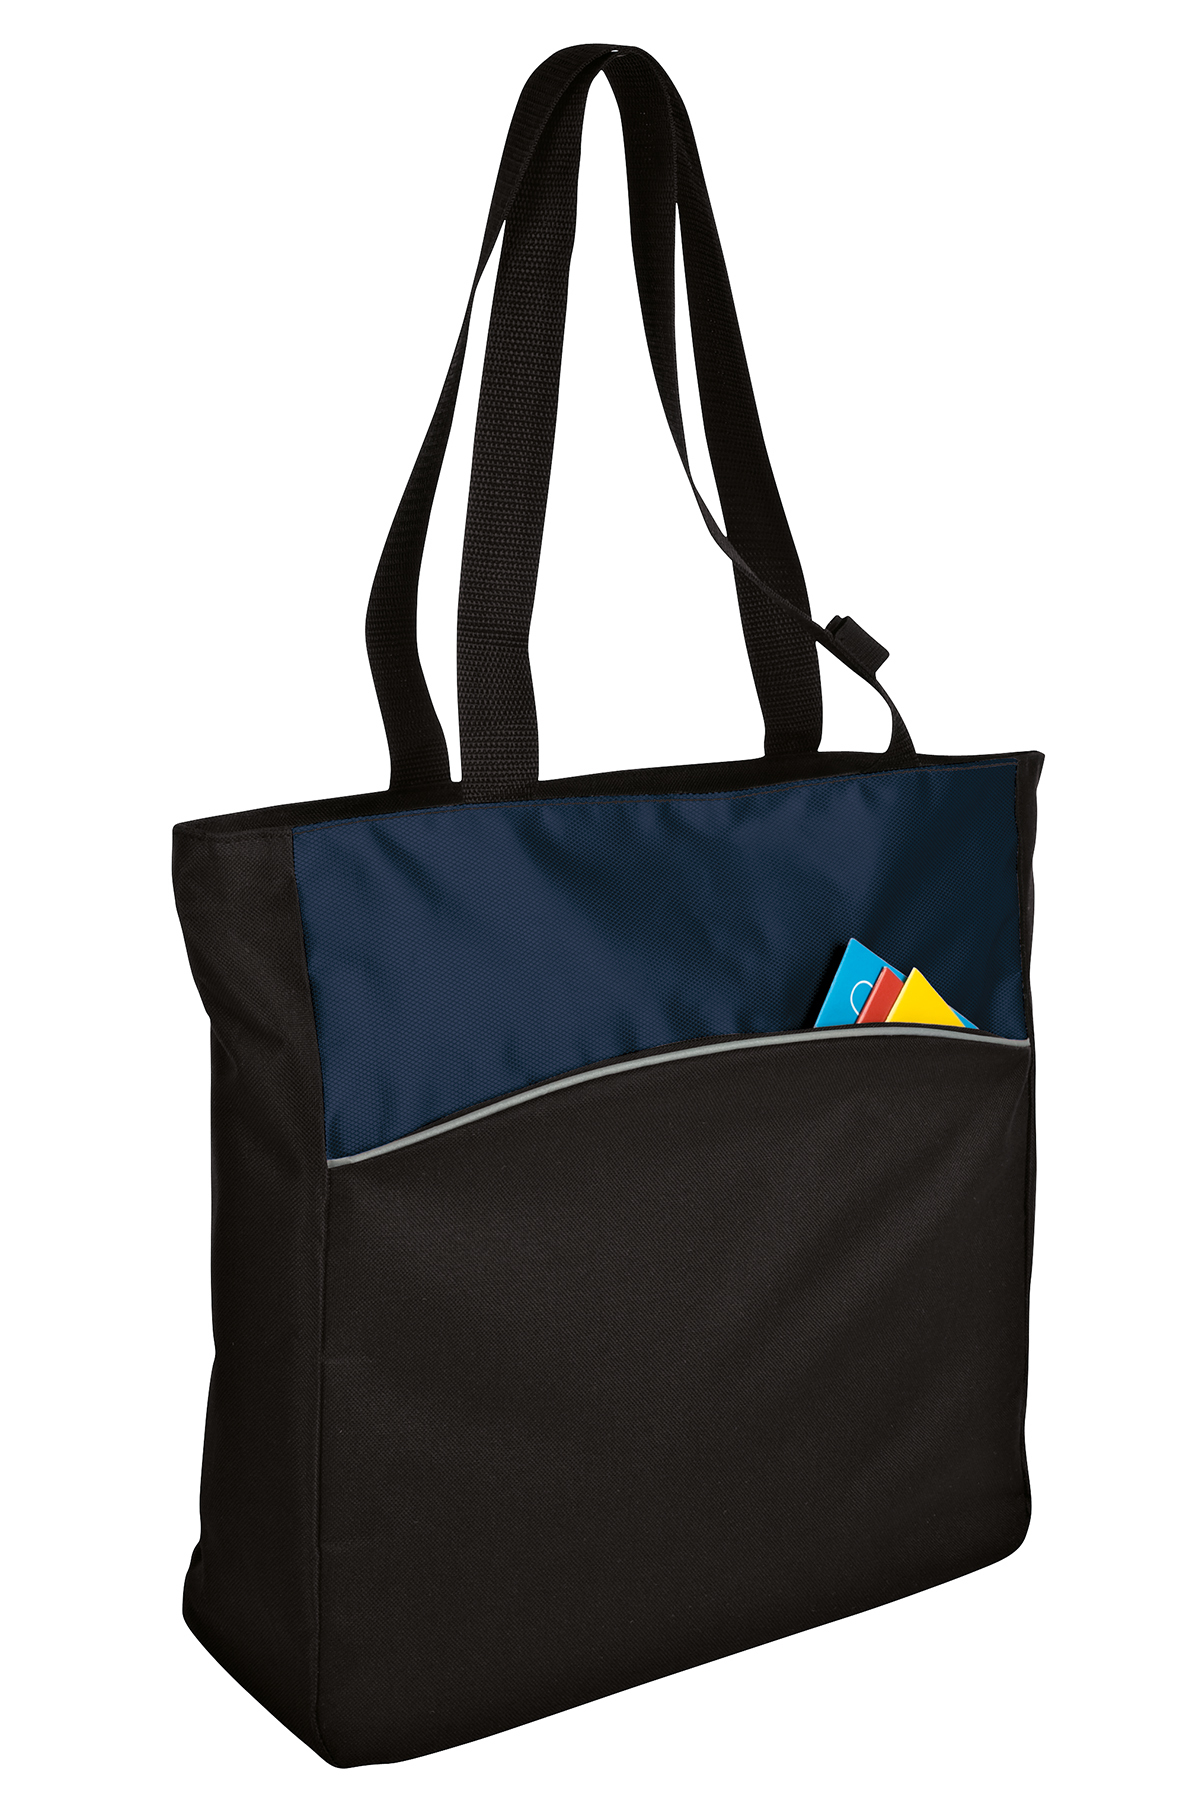 Port Authority B1510 - Two-Tone Colorblock Tote